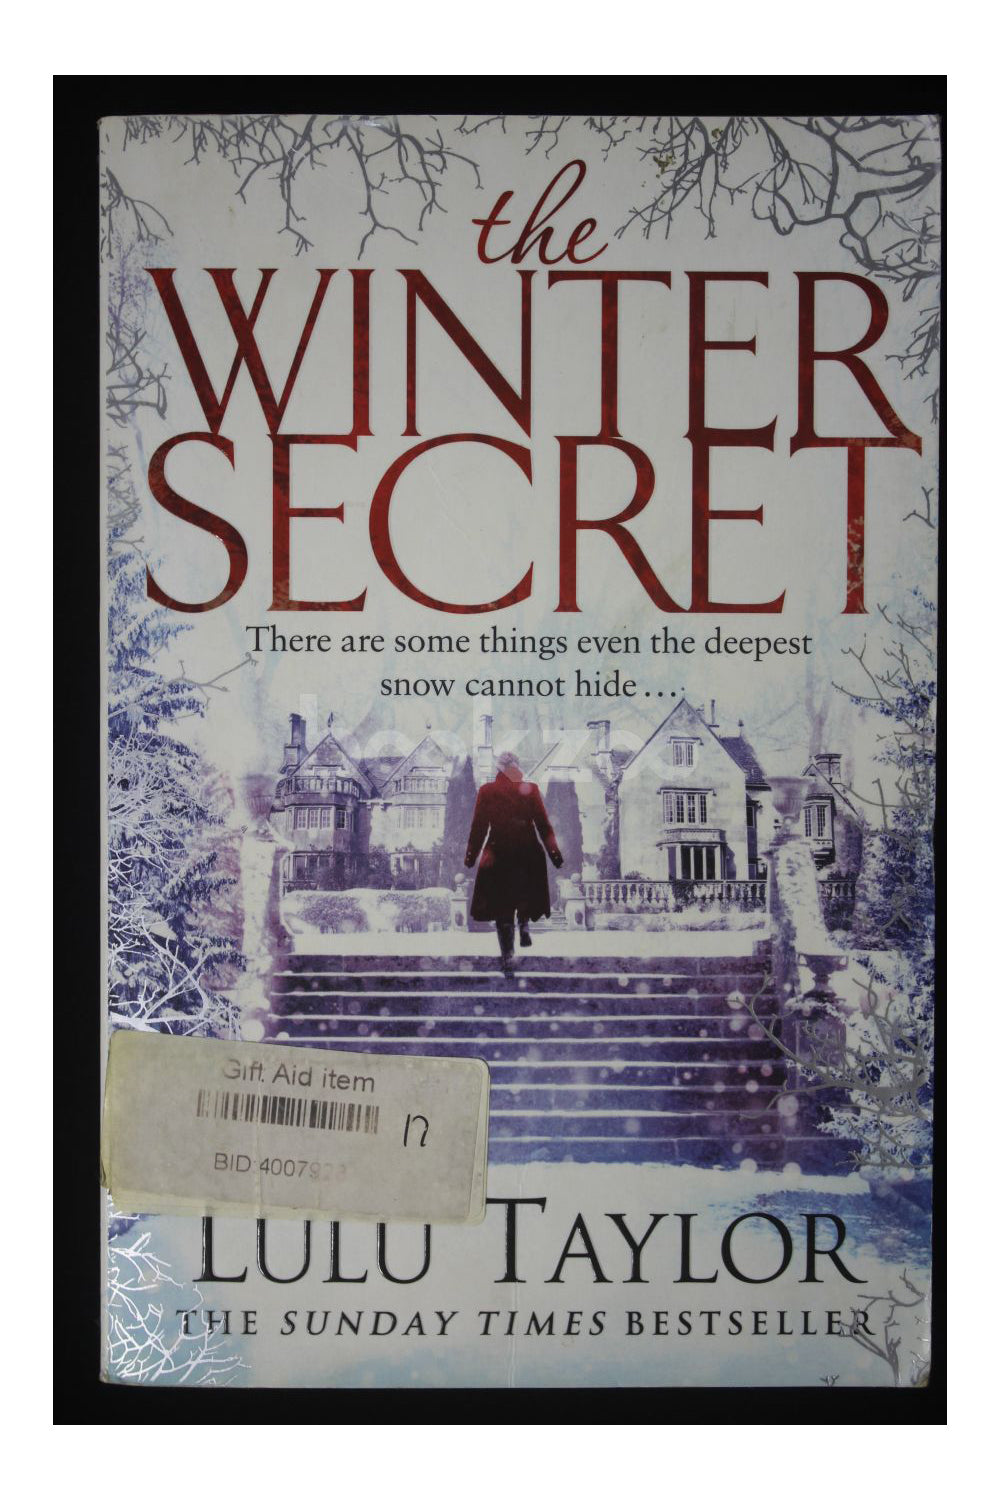 Secret　Buy　The　Winter　Lulu　by　Taylor　at　Online　bookstore　—